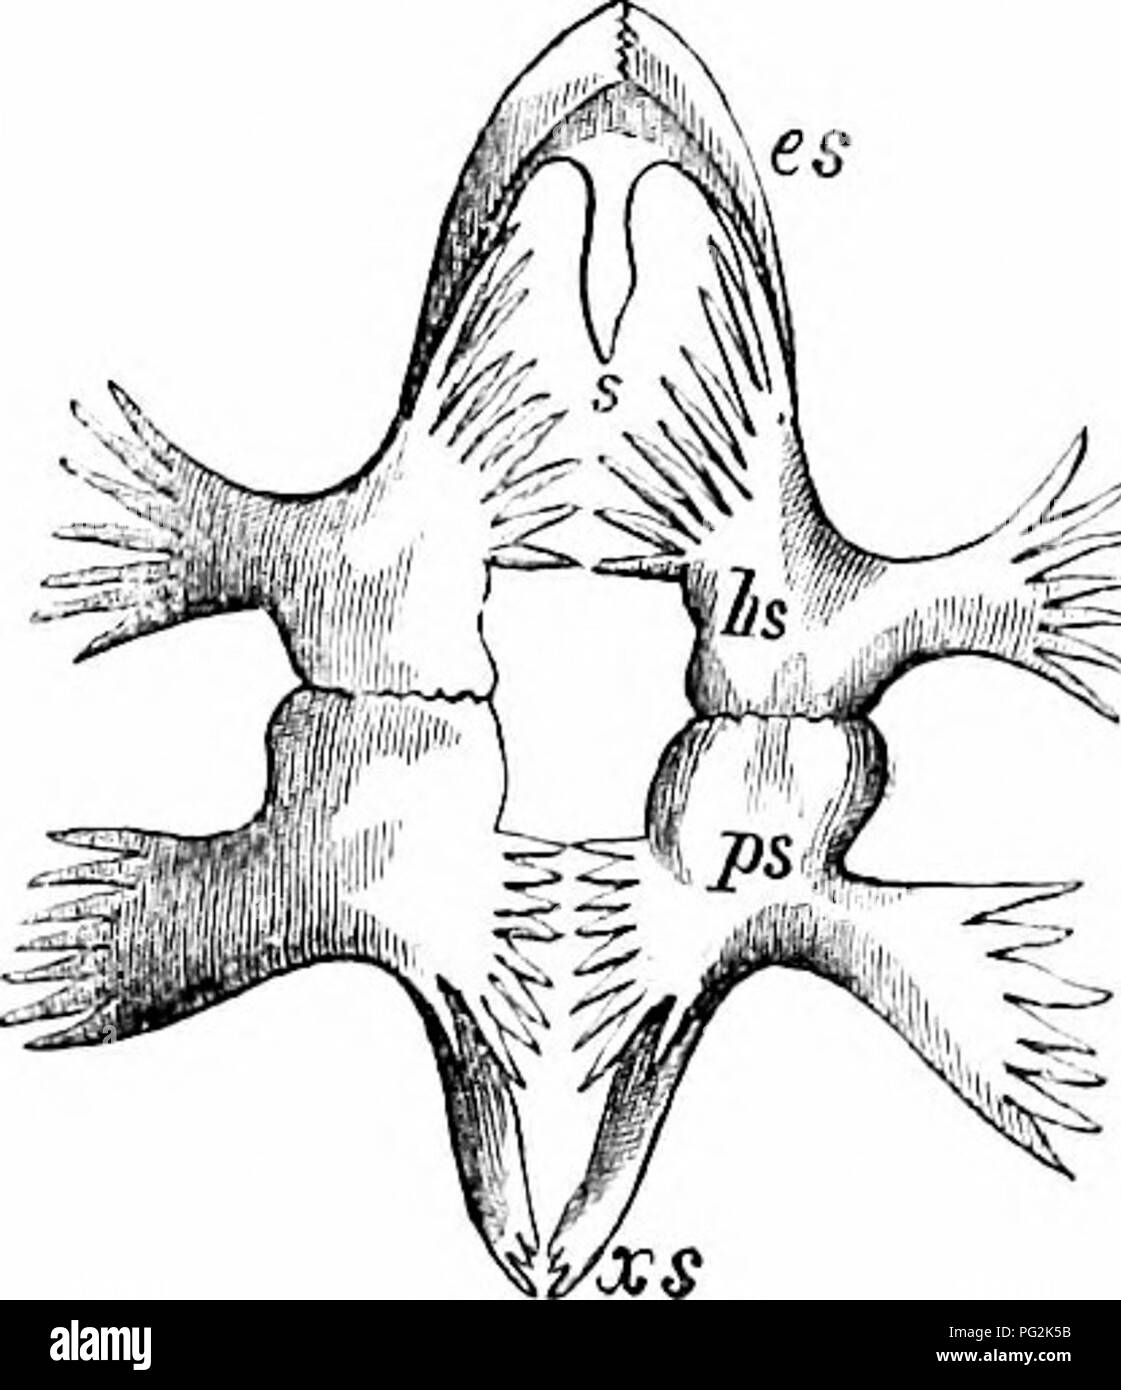 . On the anatomy of vertebrates. Vertebrates; Anatomy, Comparative; 1866. ANATOMY OF VERTEBRATES. (i3 ginal scutes,' suiiported by the marginal plates, and crossing their sutures. In the Trianijcida the exterior surfiice of the carapace and plastron is remarkable ibr its rougli vermicular or piuictate sculptiu'ing. The median bony pieces of the carapace, fig. 52, ch, s i to .s ii, have been regarded as lateral expansions of the summits of the neural spines ; the medio-lateral pieces, ib. pi i to pi 8, as similar devclopemcnts of the ril^s ; and the marginal pieces ib. m i to m 13, as the homol Stock Photo